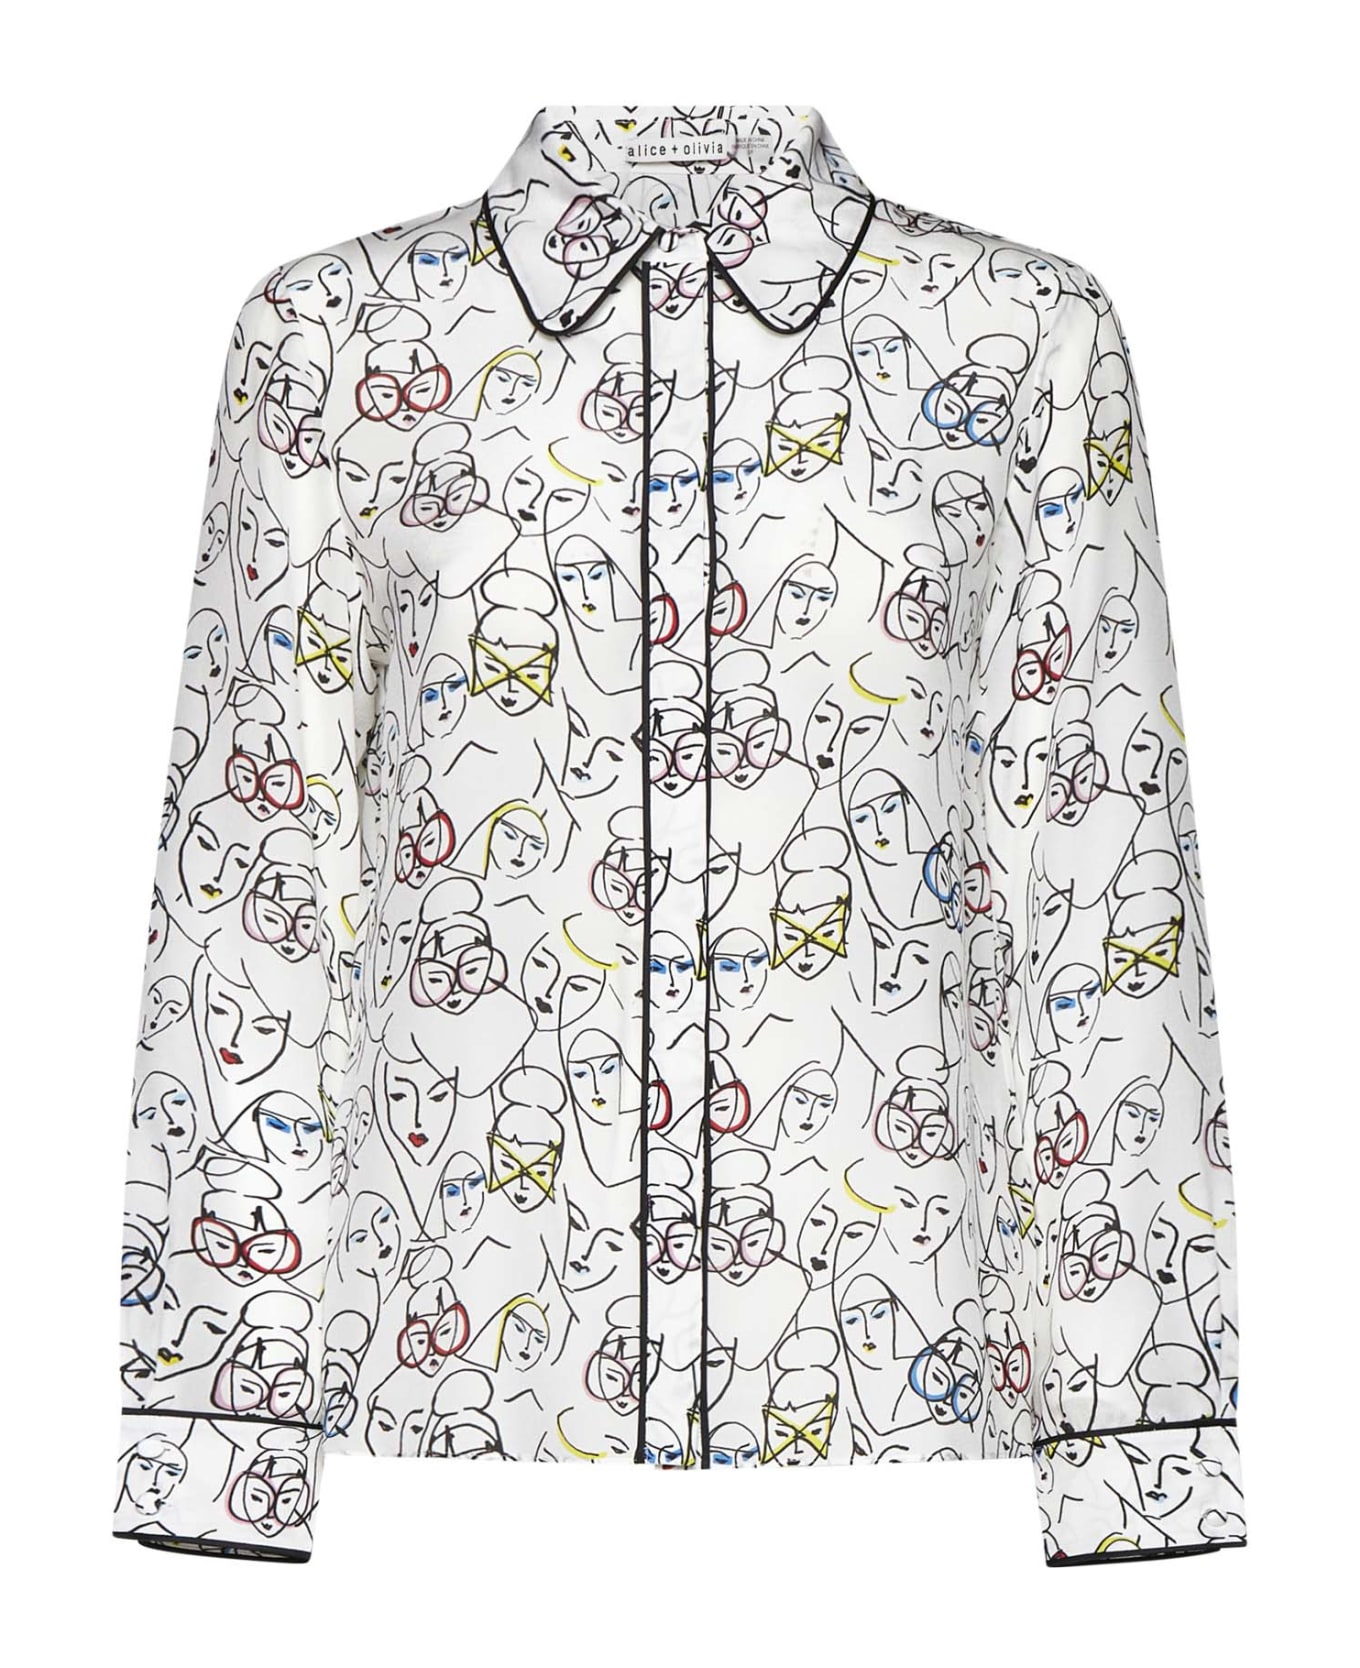 Alice + Olivia Shirt - Bisous stace ブラウス